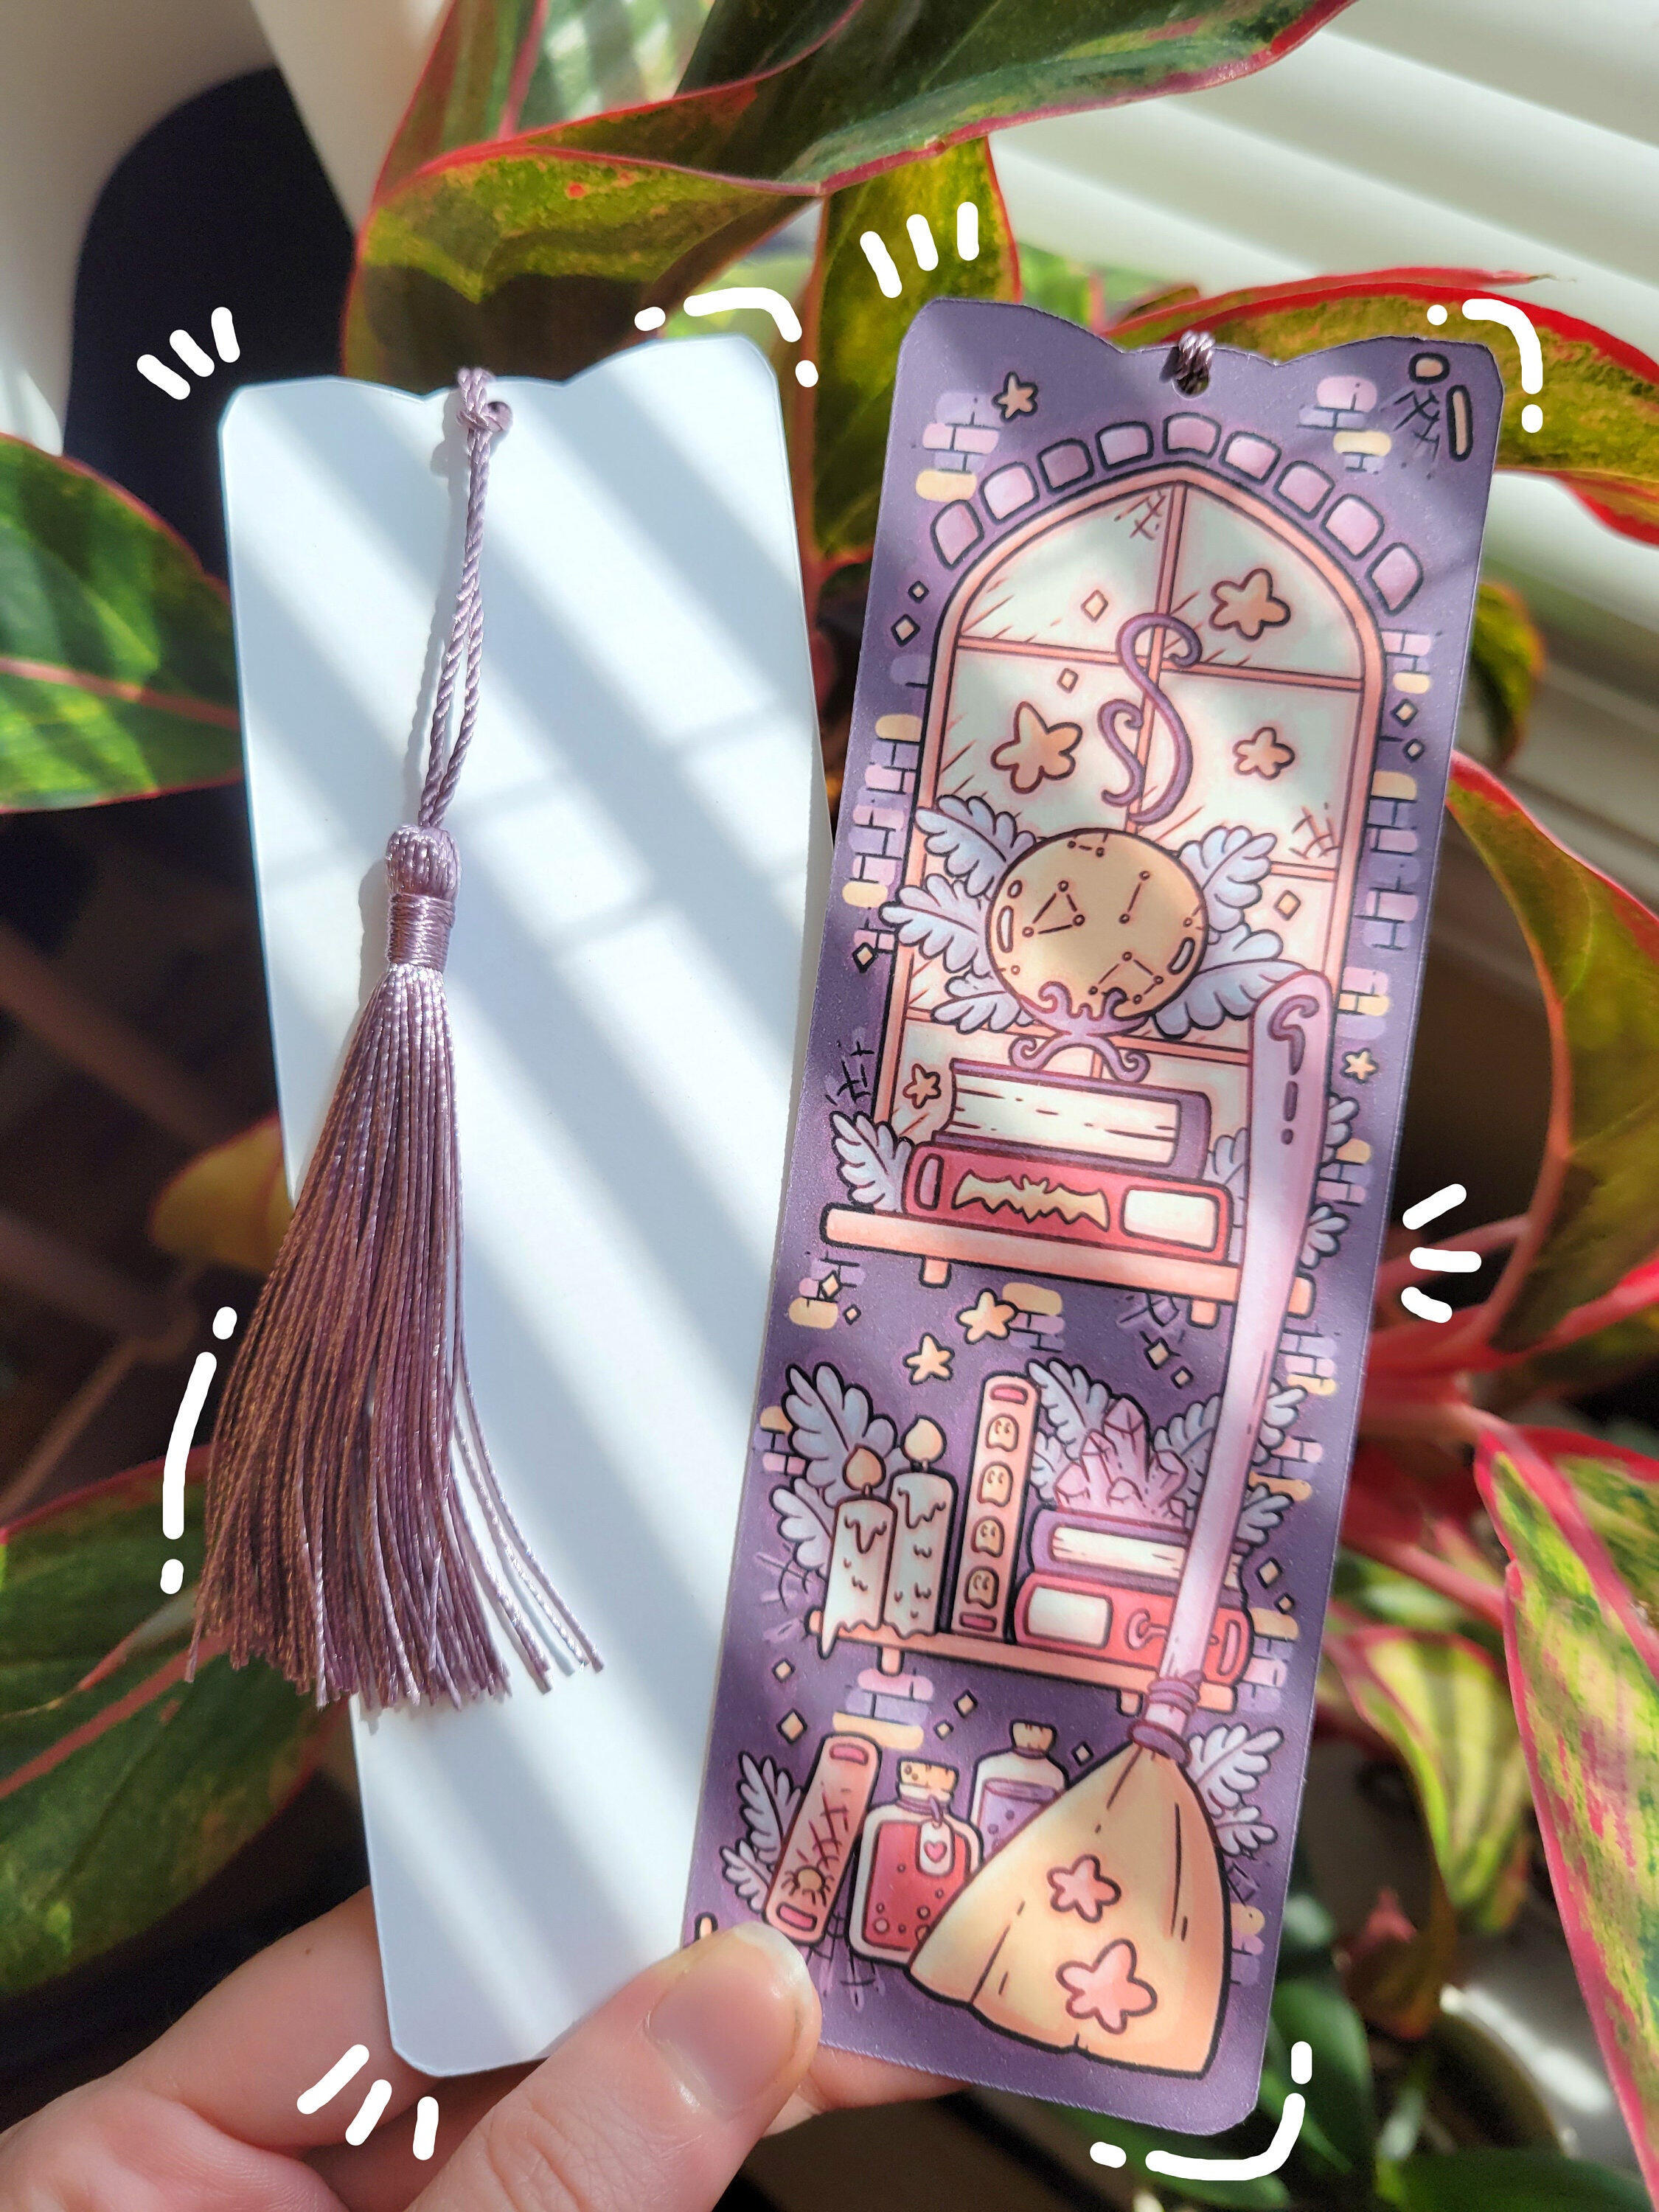 DIY Paper Bookmarks for Back to School with Cricut - DIY Danielle®